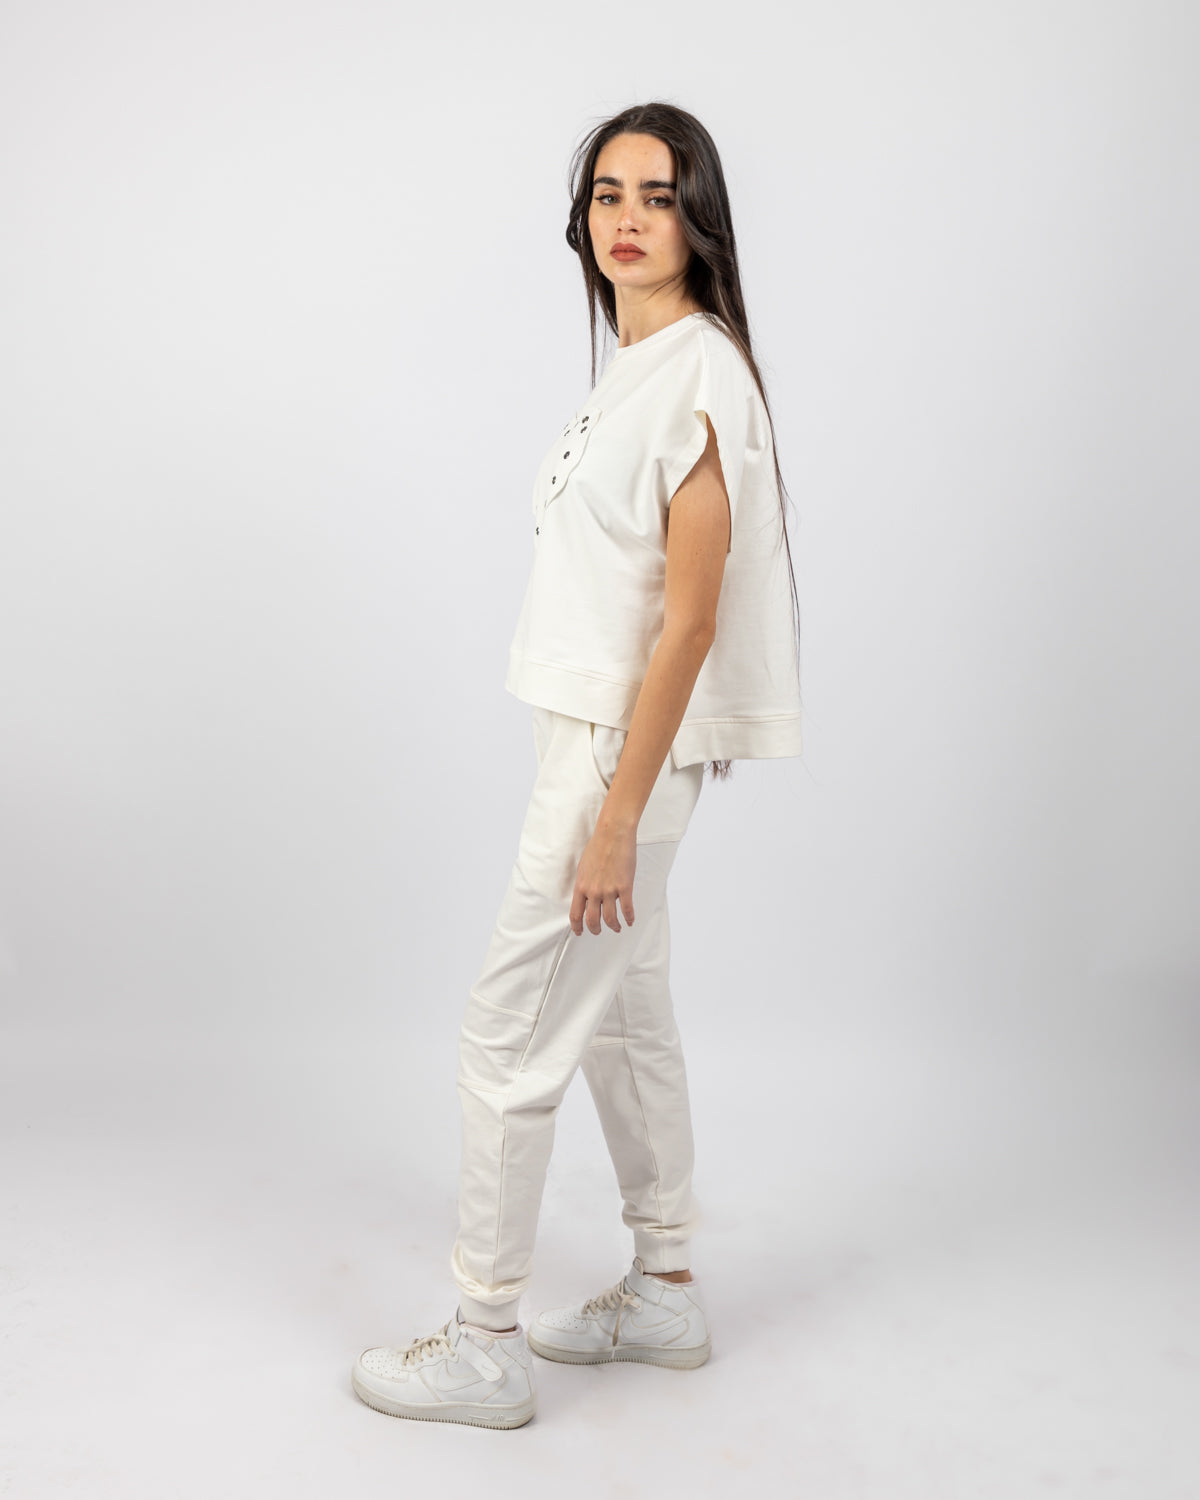 Sweat Pant For Women - Off White